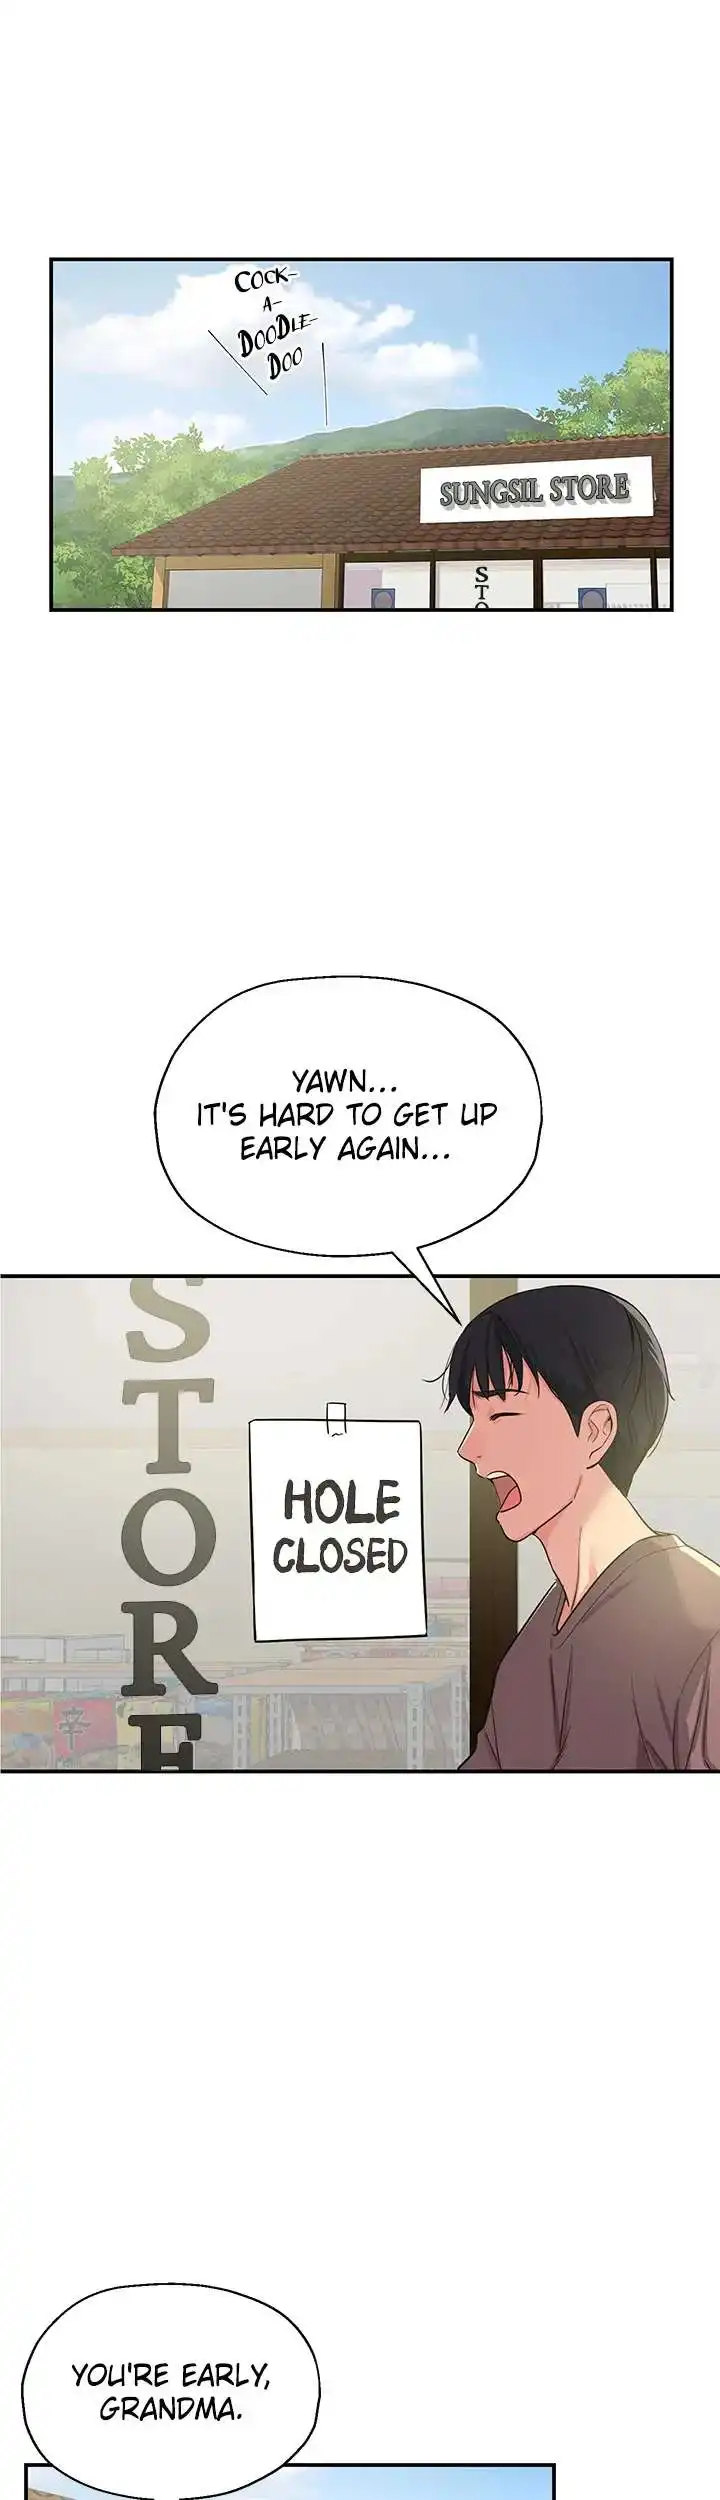 The Hole is Open Chapter 1 - Page 51